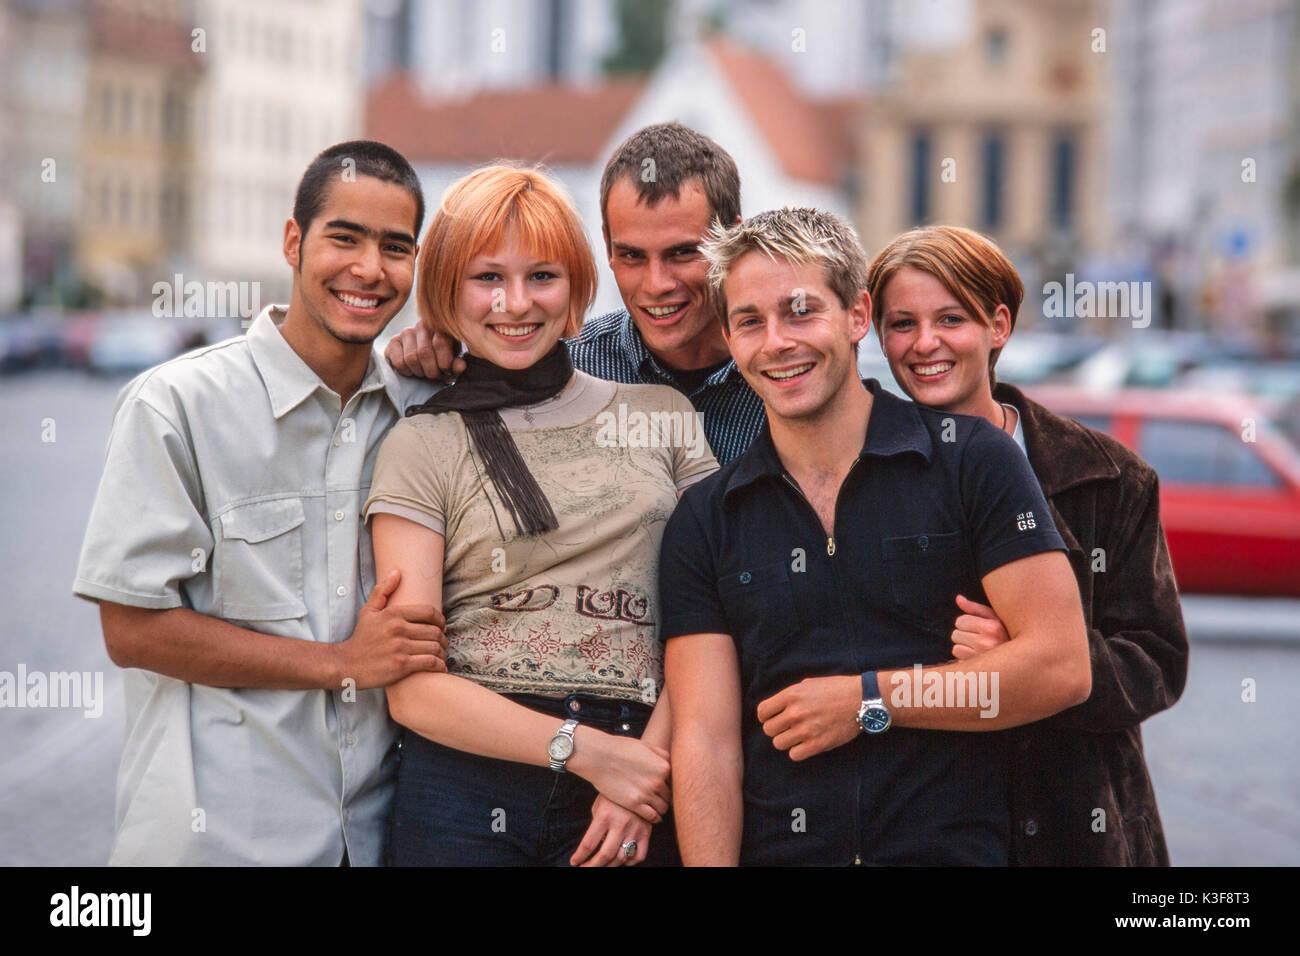 Group of young persons Stock Photo